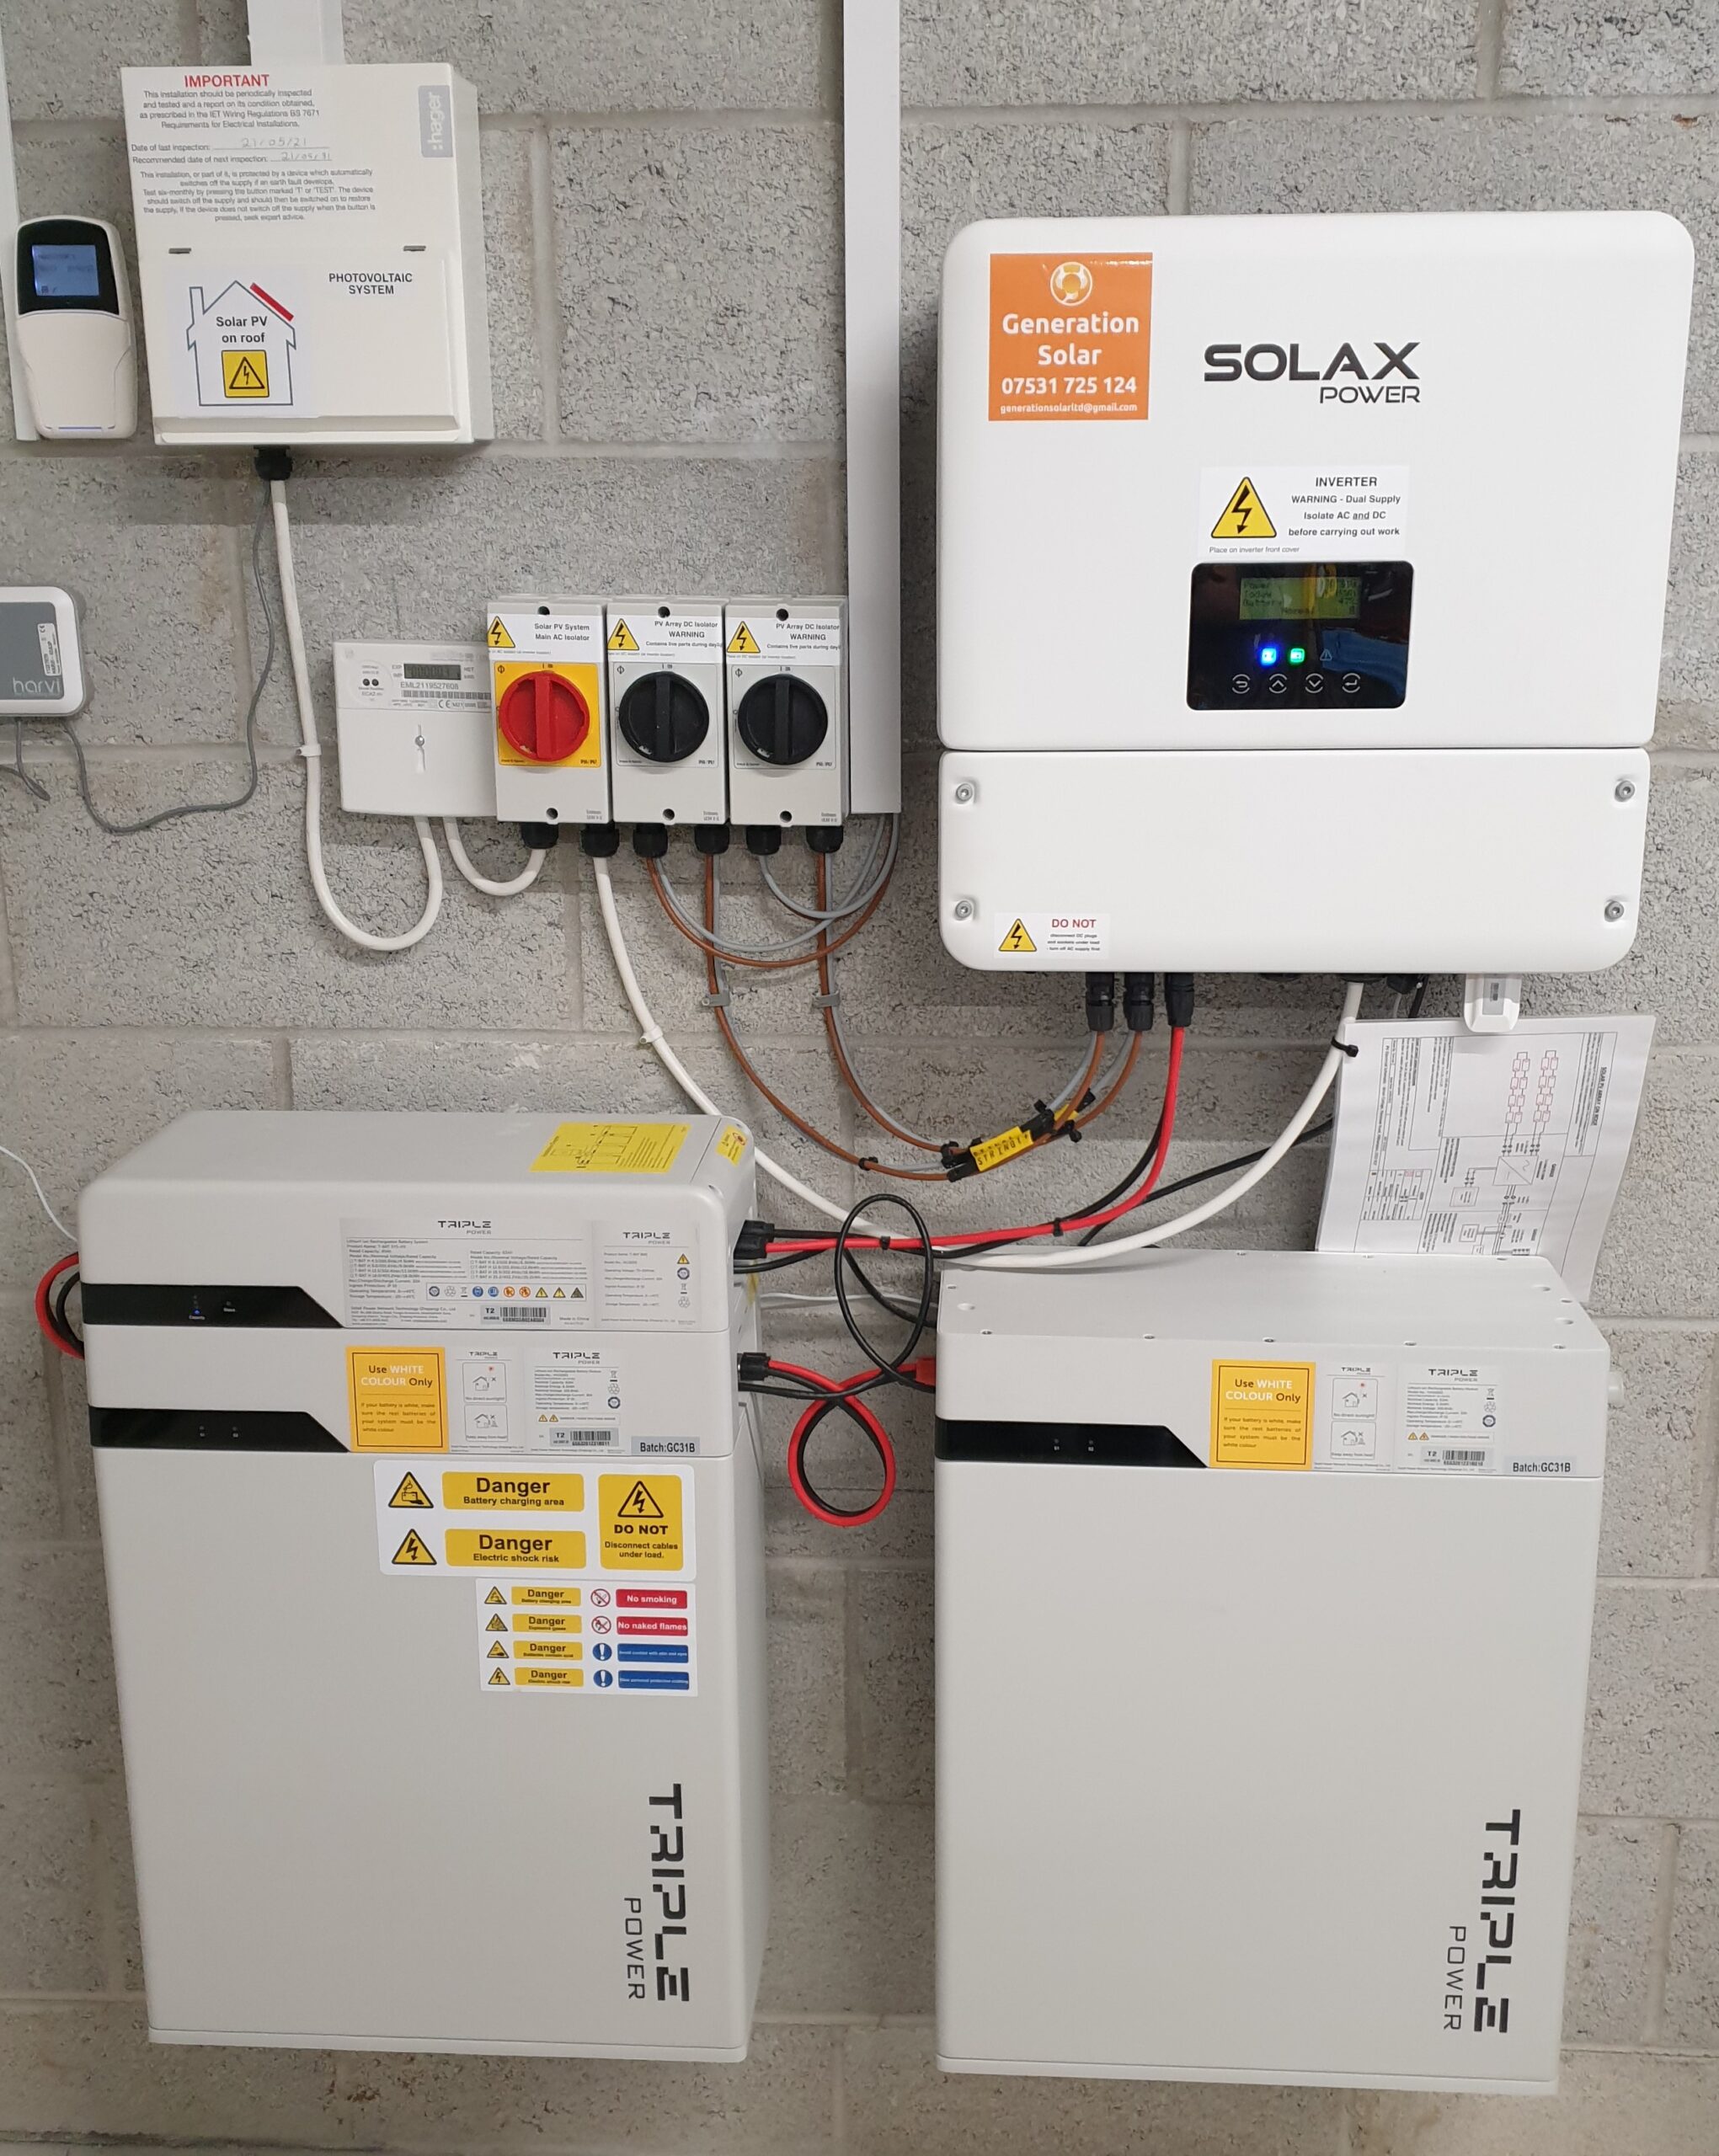 Solax hybrid inverter with 2 6.3kWh batteries